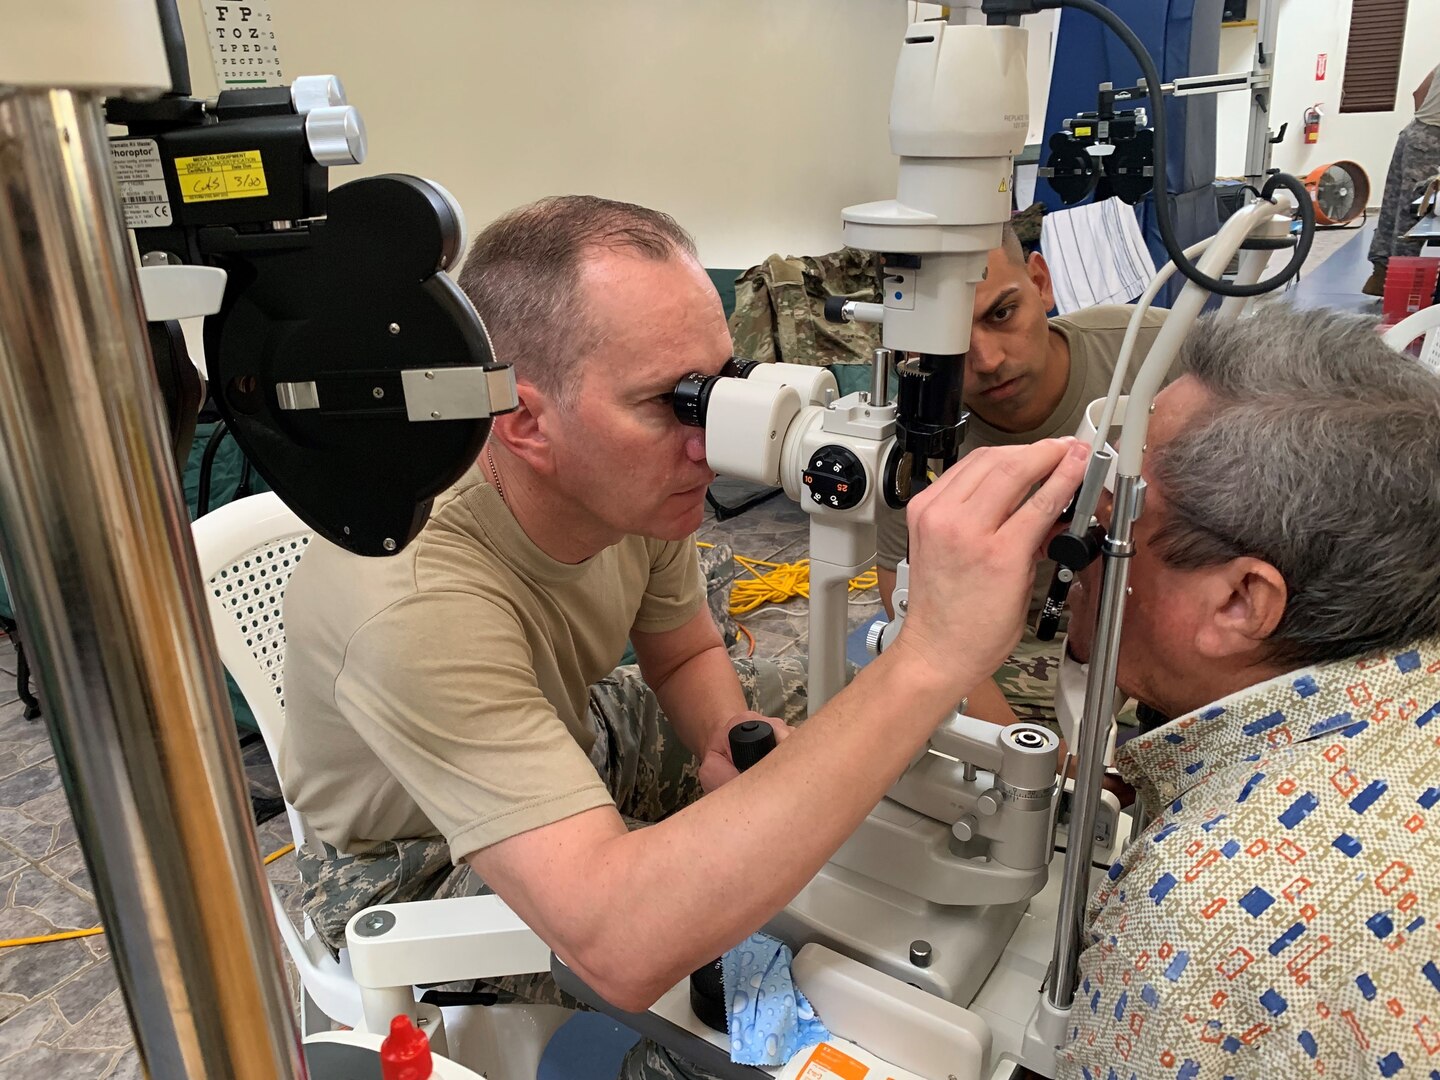 Maj. Erik Zingler, optometry officer in charge for the 155th Medical Group, Lincoln, Neb., performs an optometry vision test May 2, 2019, in Residential Juan Ferrer, Puerto Rico. Zingler is a member of Innovative Readiness Training, a Defense Department program to increase deployment readiness while providing key services such as optometry to American communities with limited access to resources.